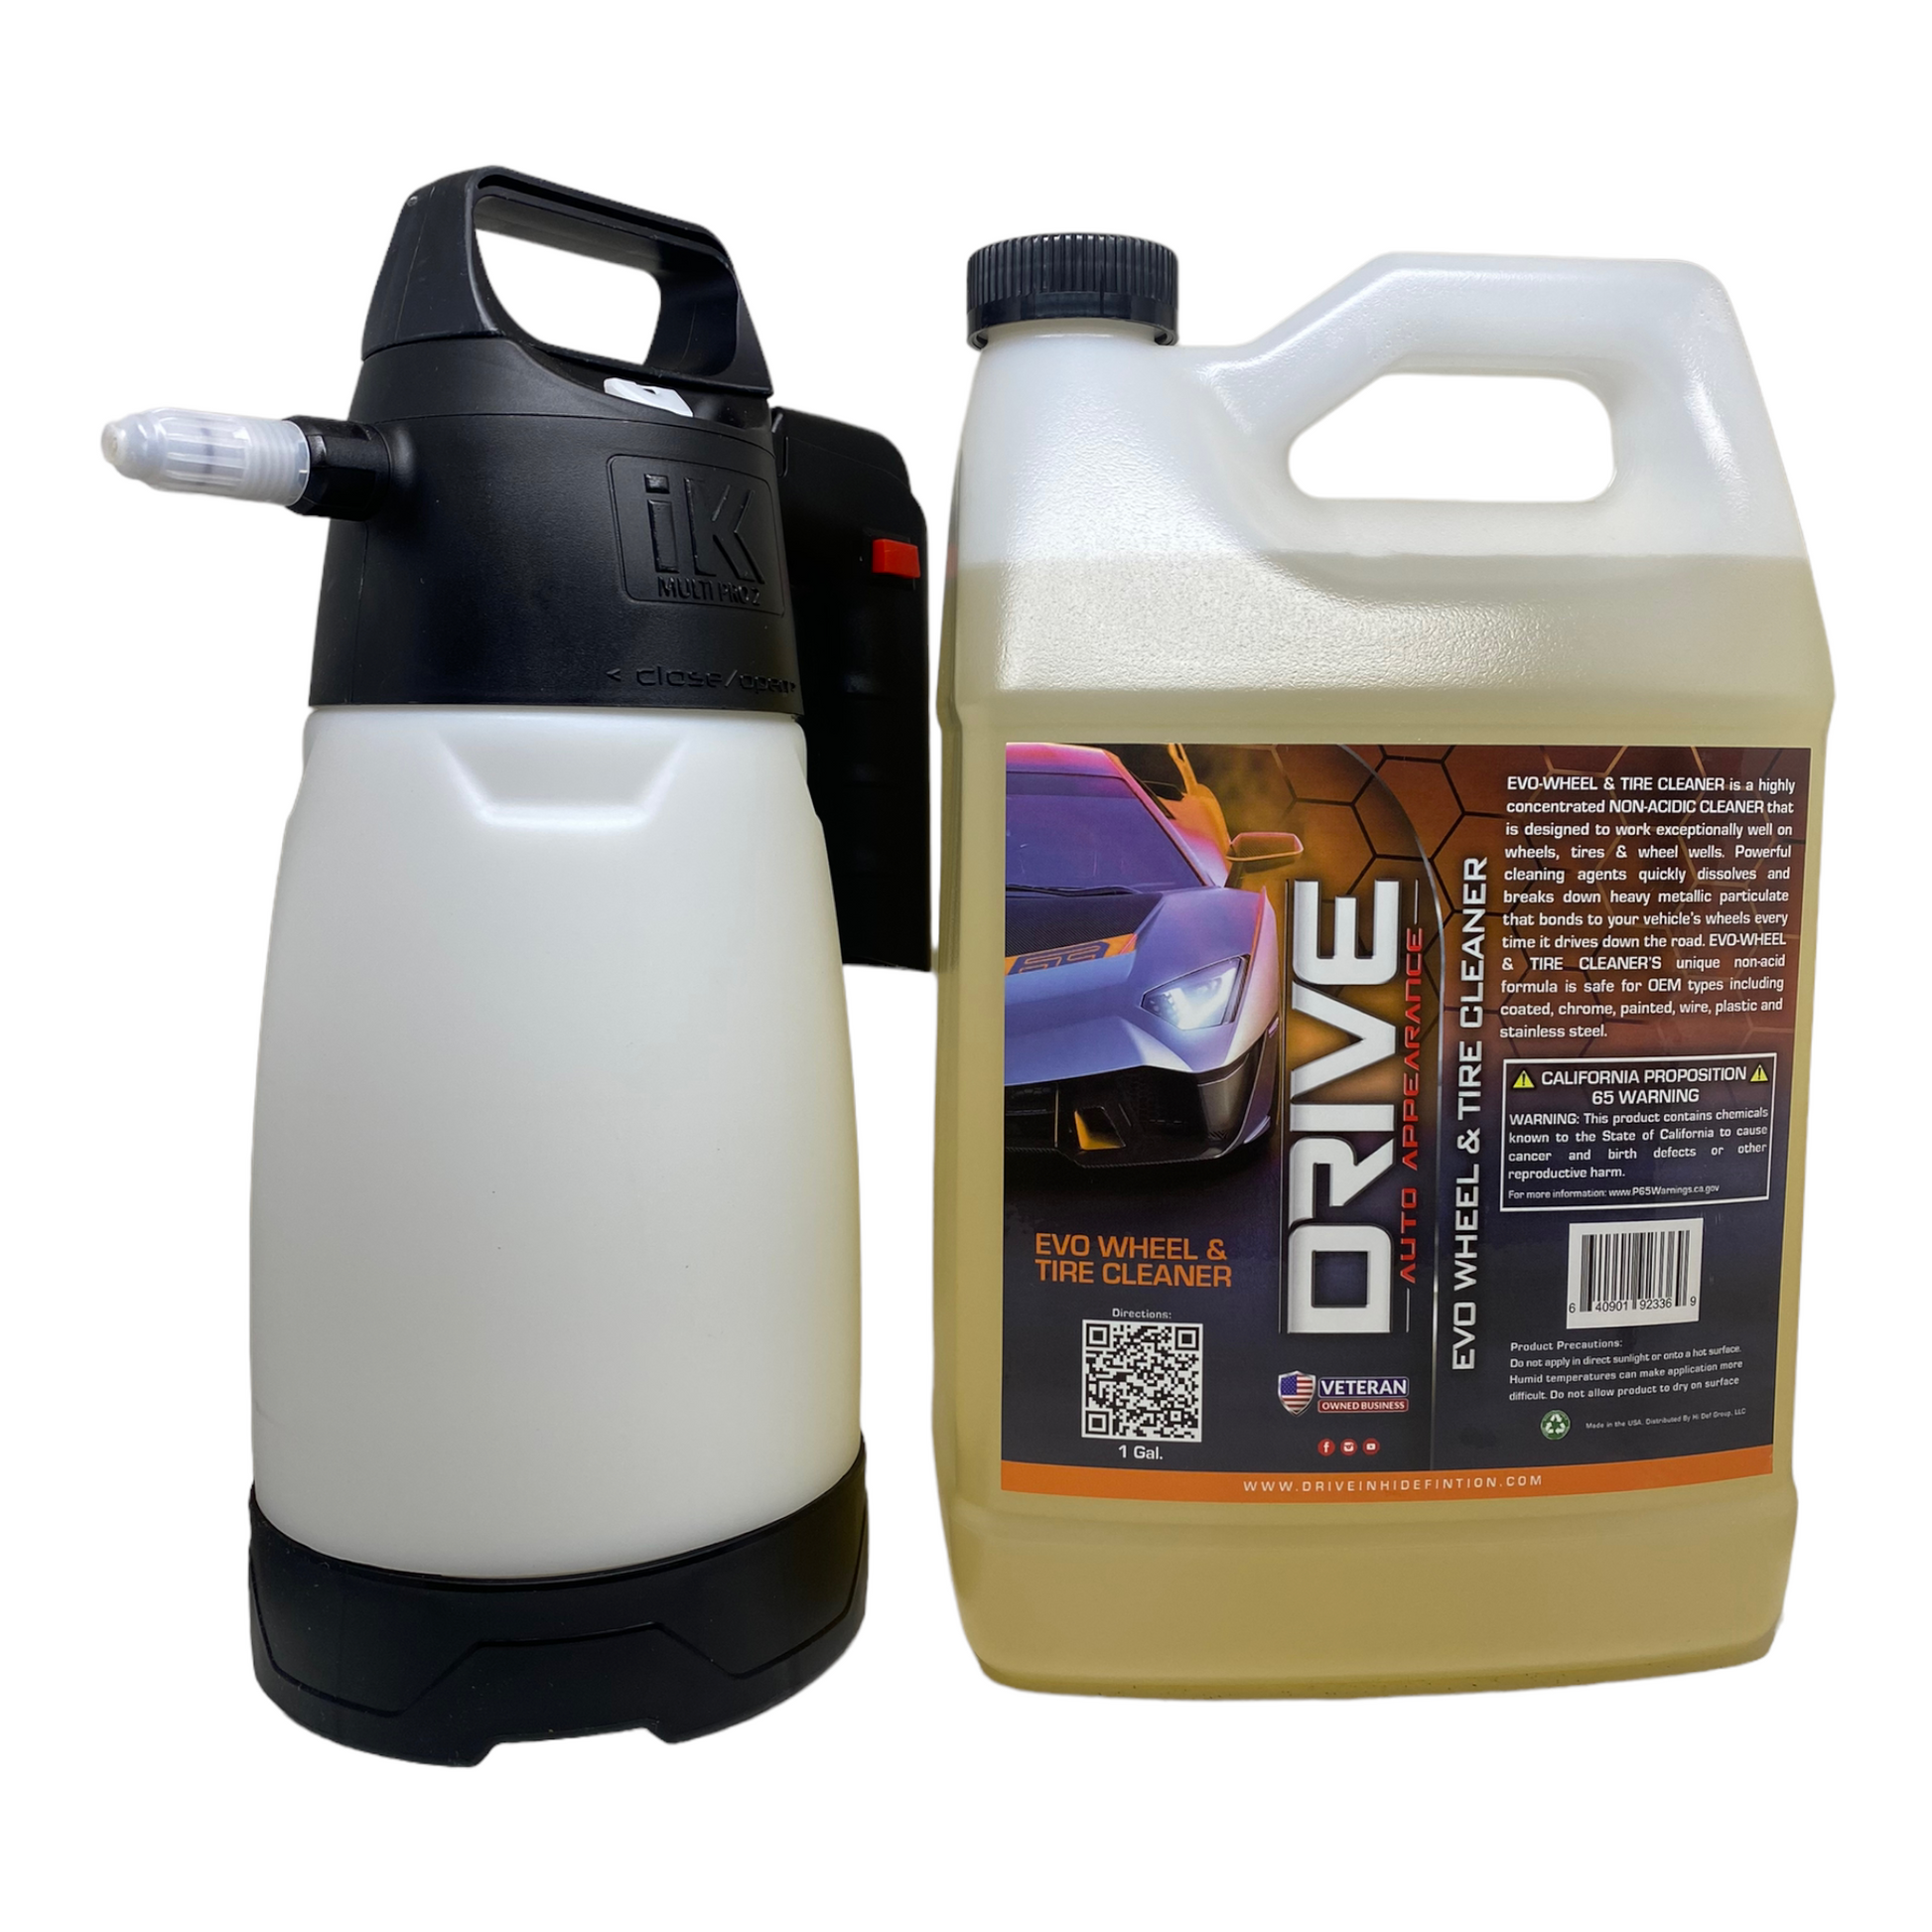 Most resistant sprayer for brake cleaners and aggressive solvents